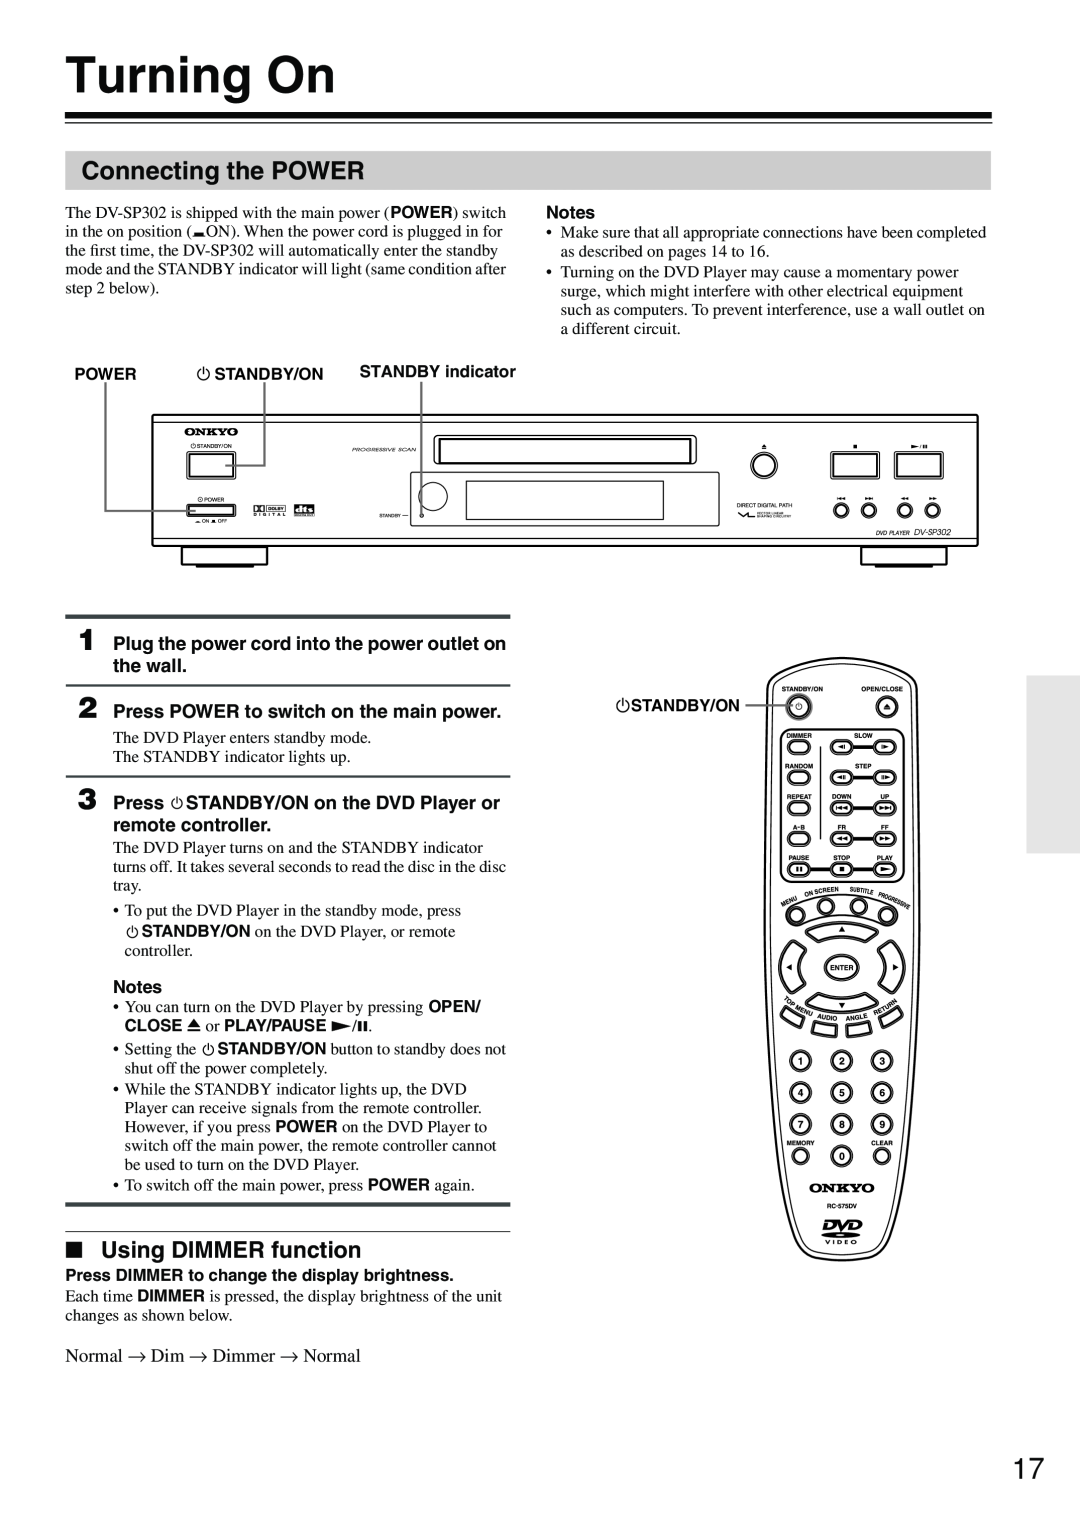 Onkyo DV-SP302 Turning On, Connecting the POWER, Using DIMMER function, Press POWER to switch on the main power 